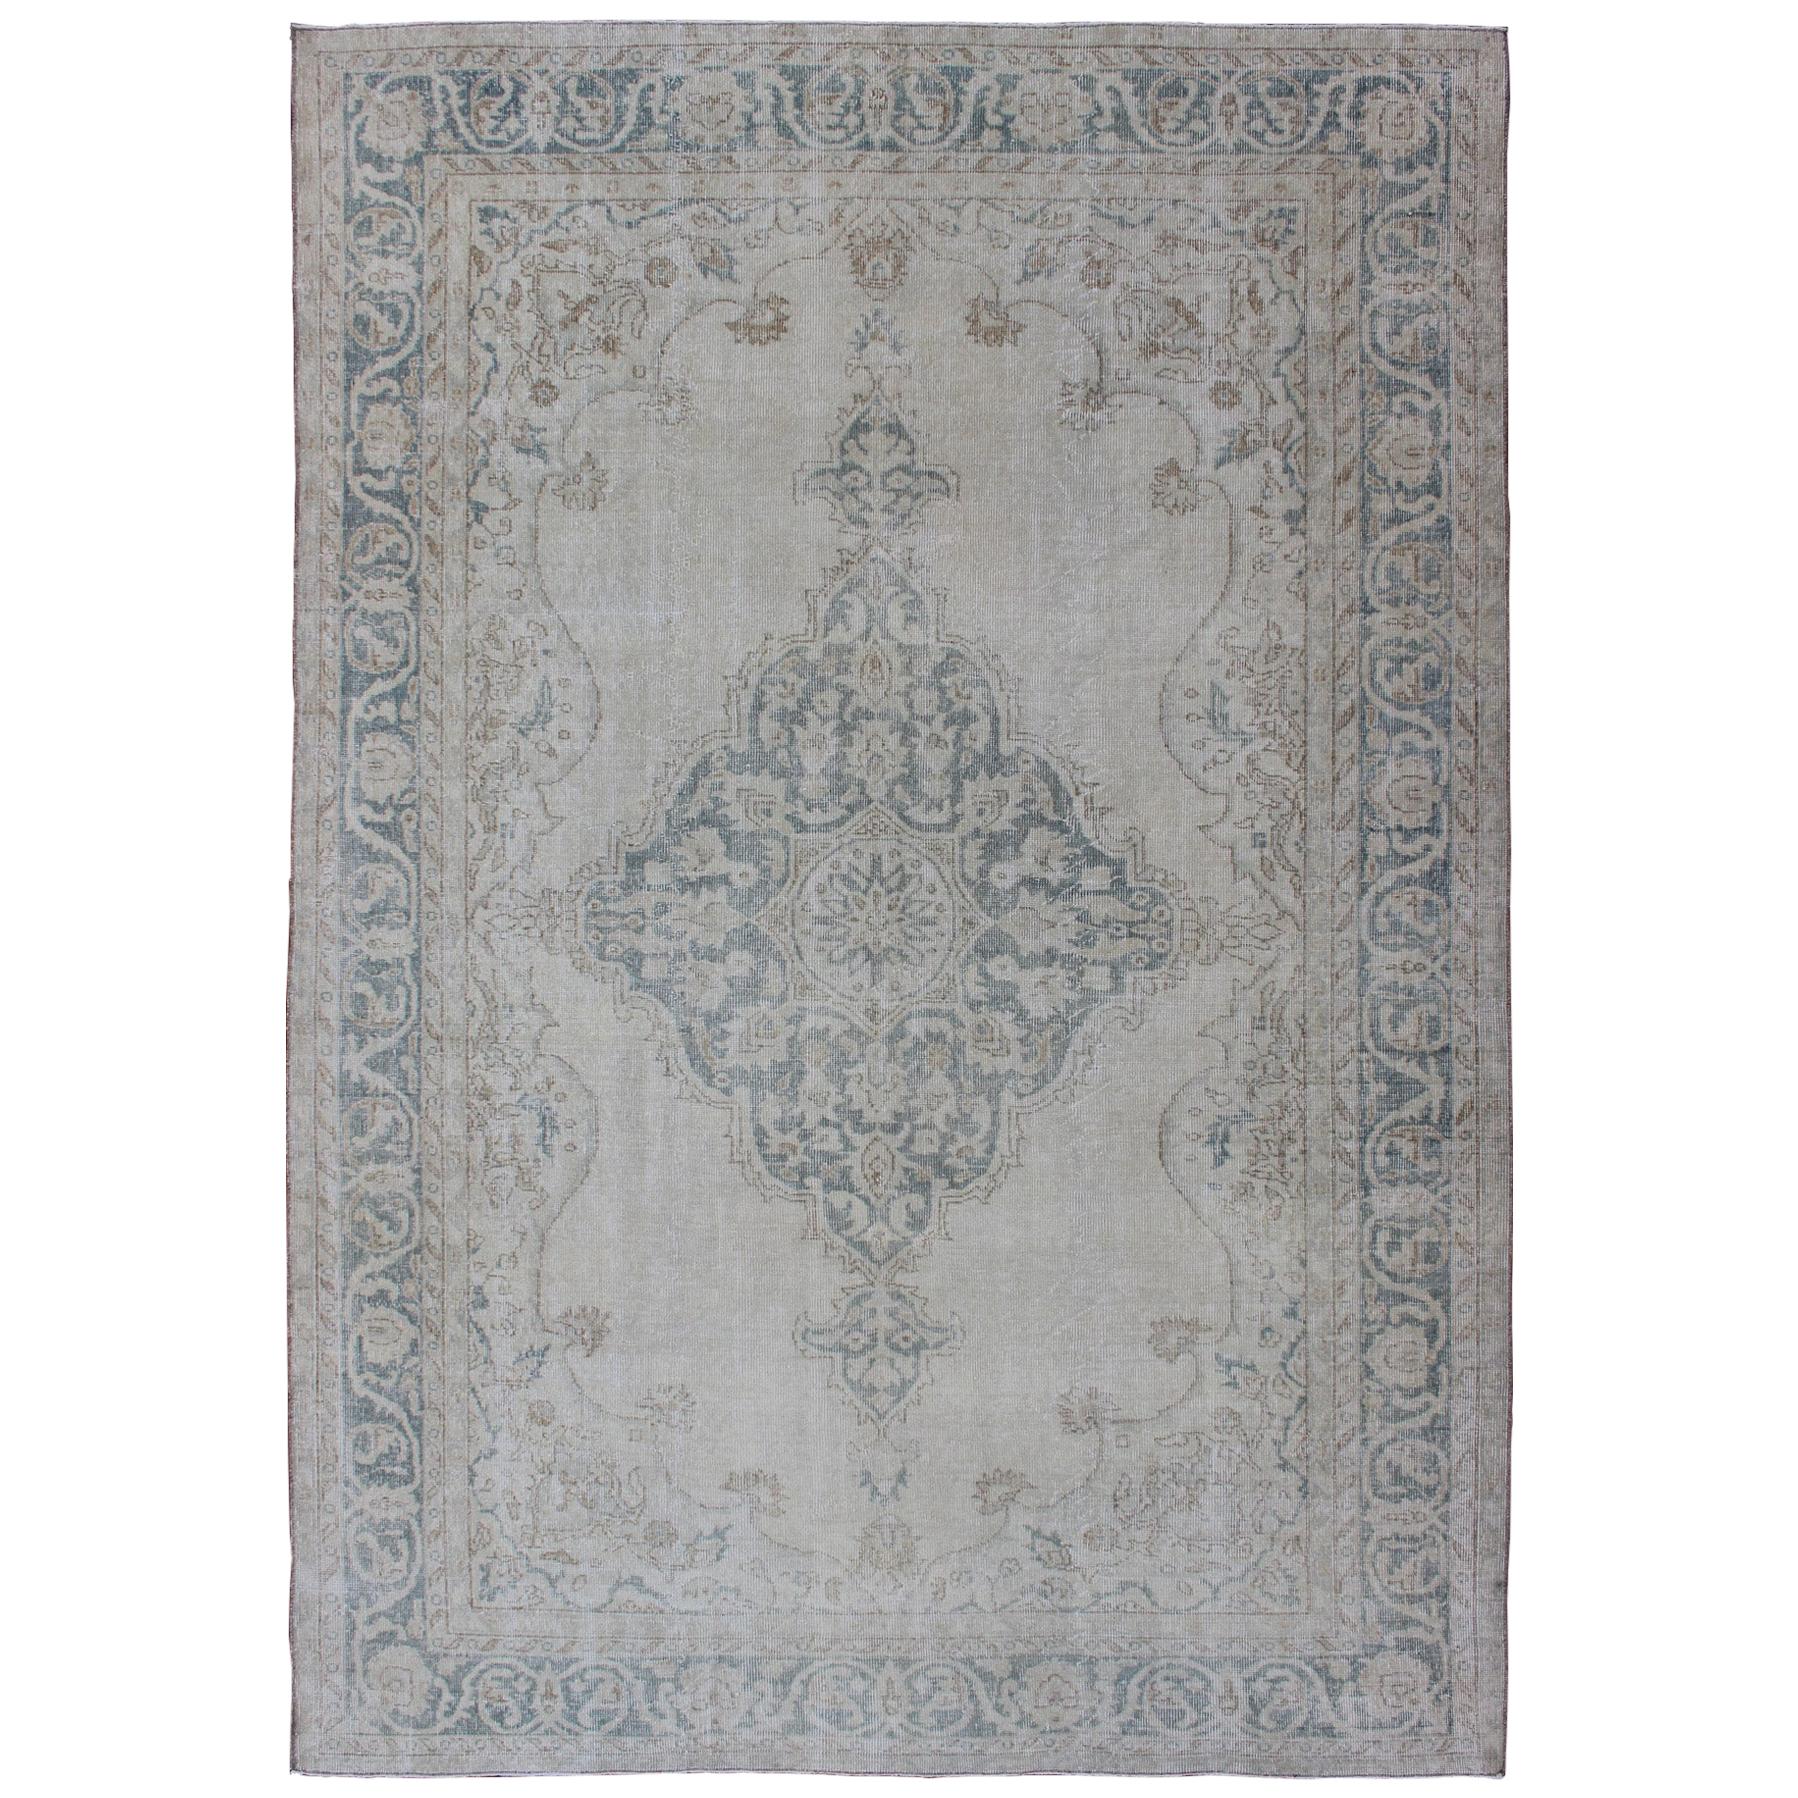 Medallion Distressed Oushak Turkey in Cream, Blue Tones, brown and Teal Blue